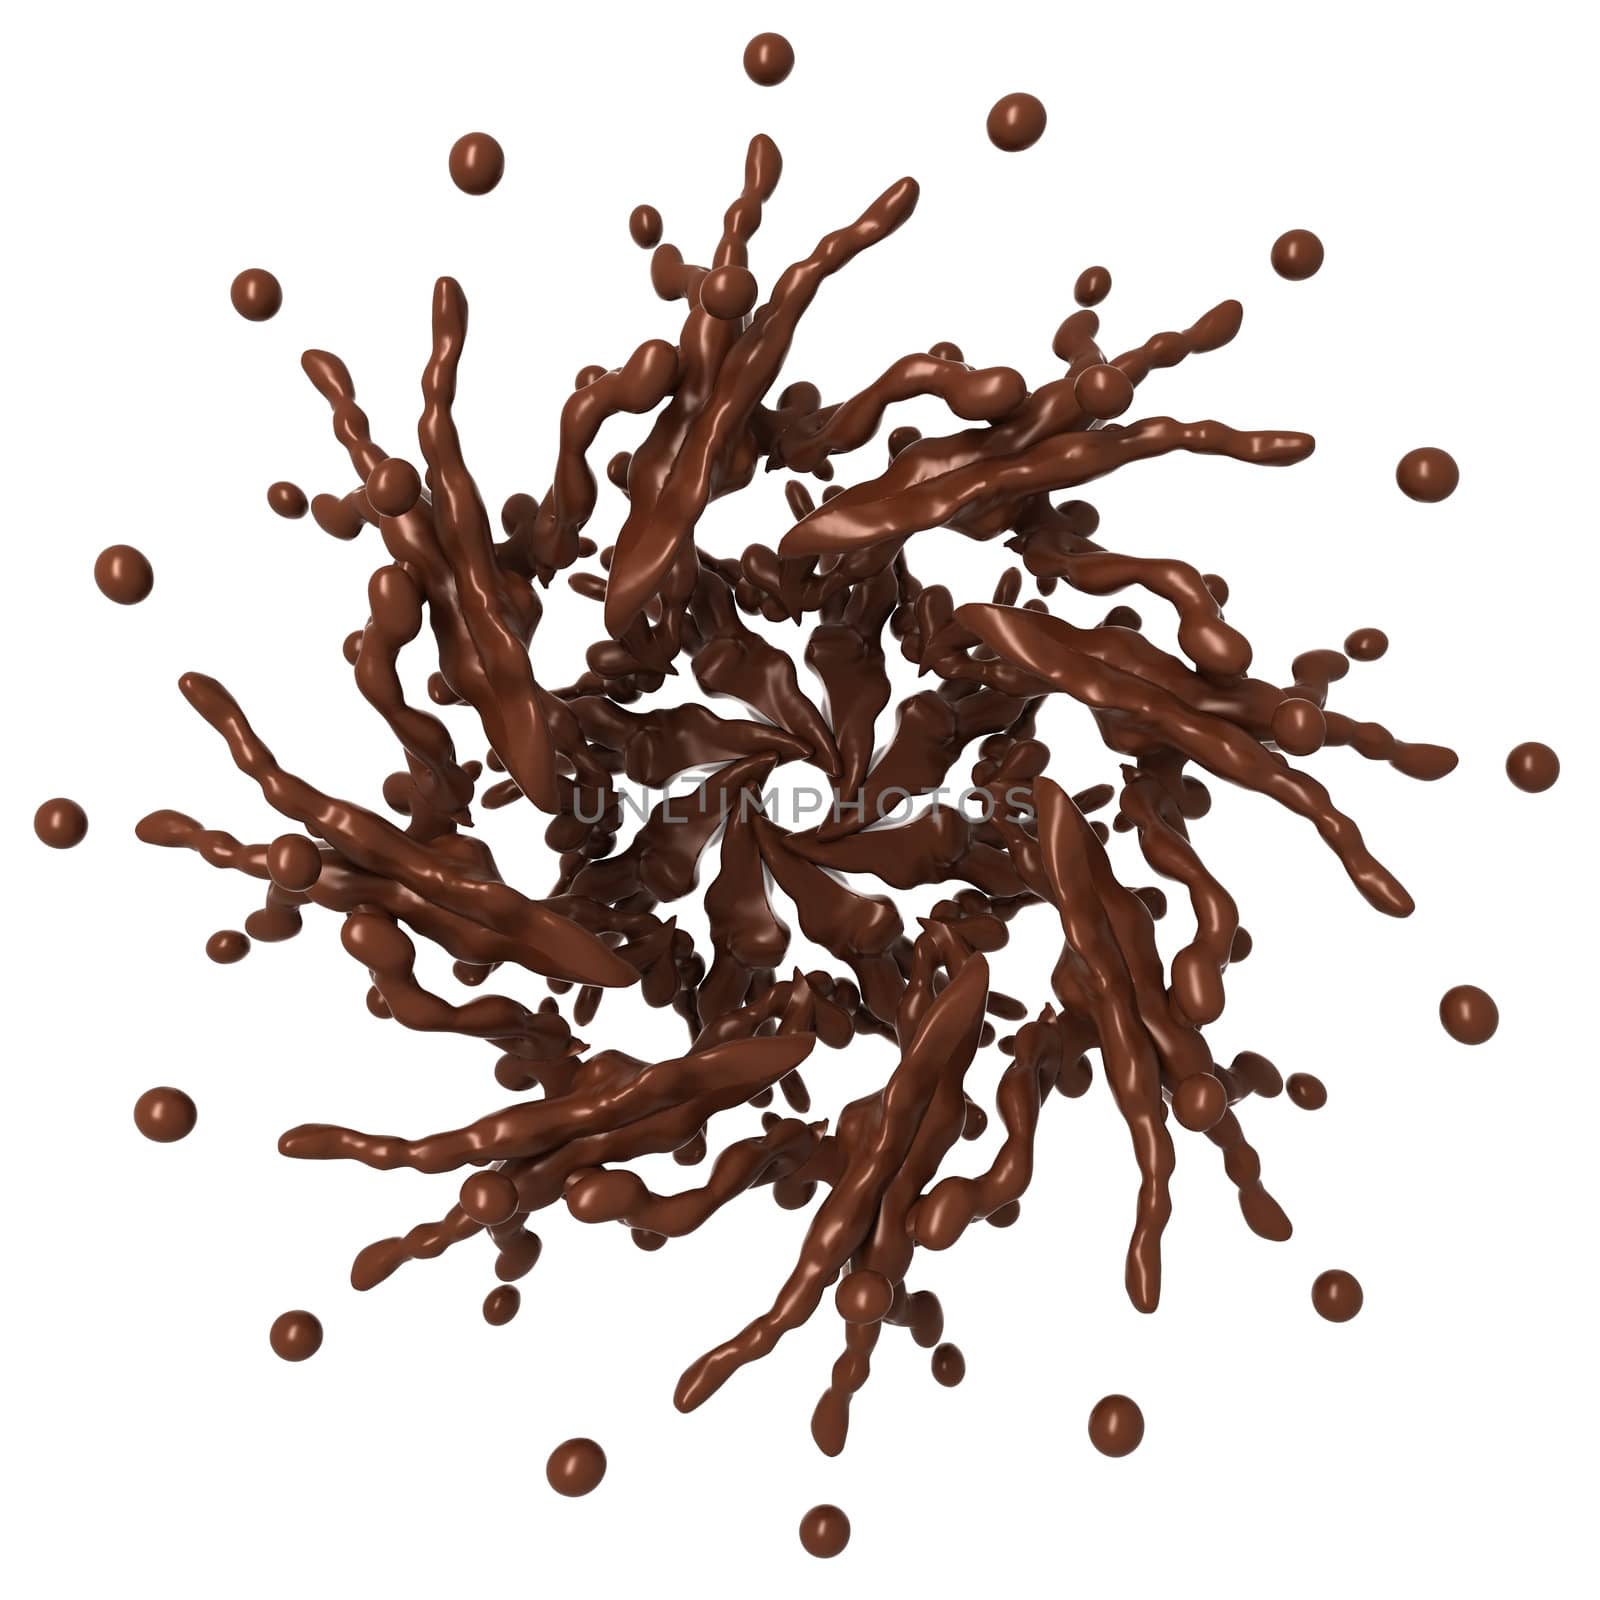 Sweet Splashes: Liquid chocolate star shape with drops isolated over white